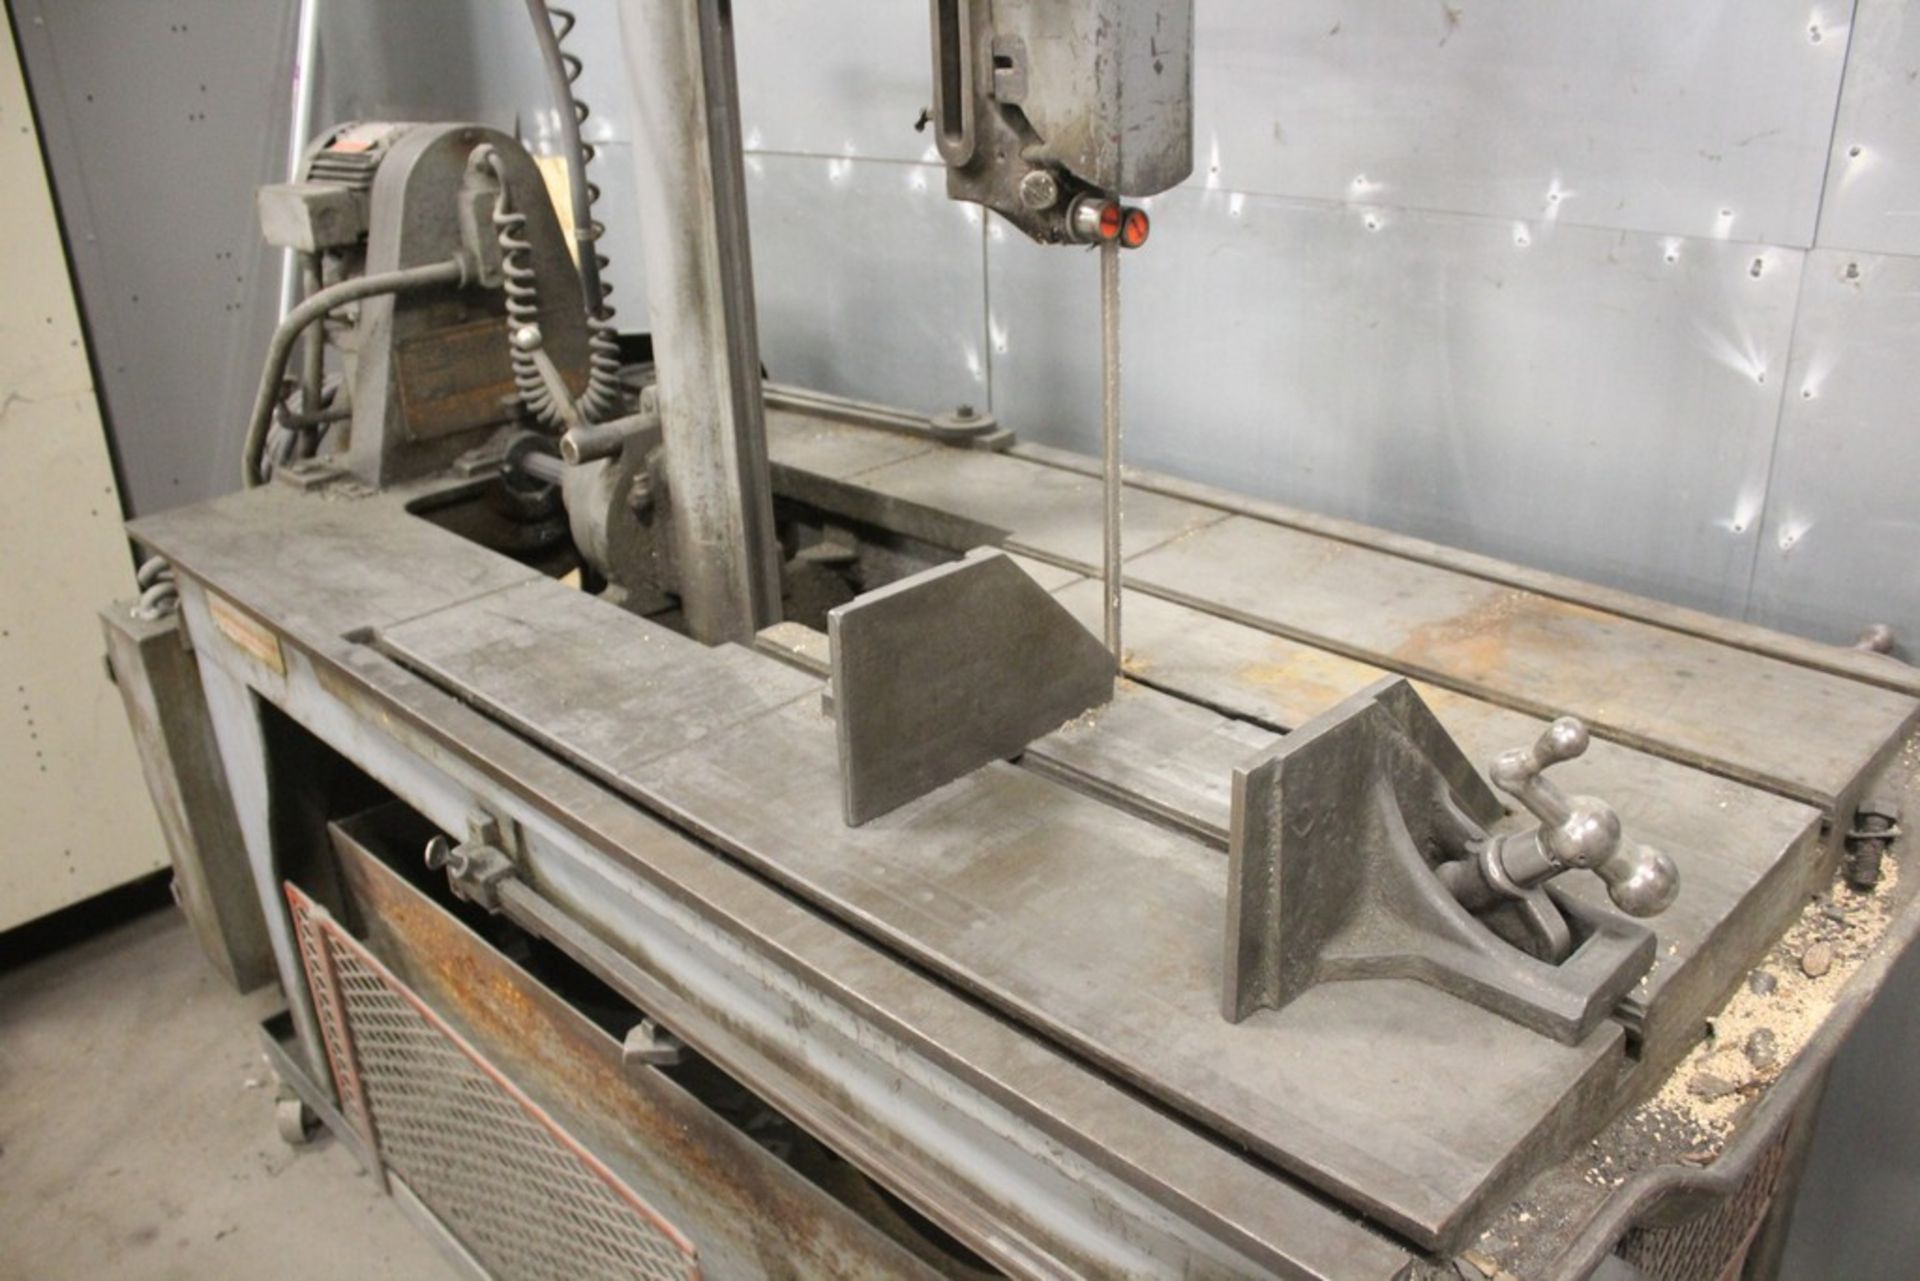 MARVEL NO. 8 UNIVERSAL VERTICAL BAND SAW, S/N 810599 Loading Fee: $250 - Image 3 of 7